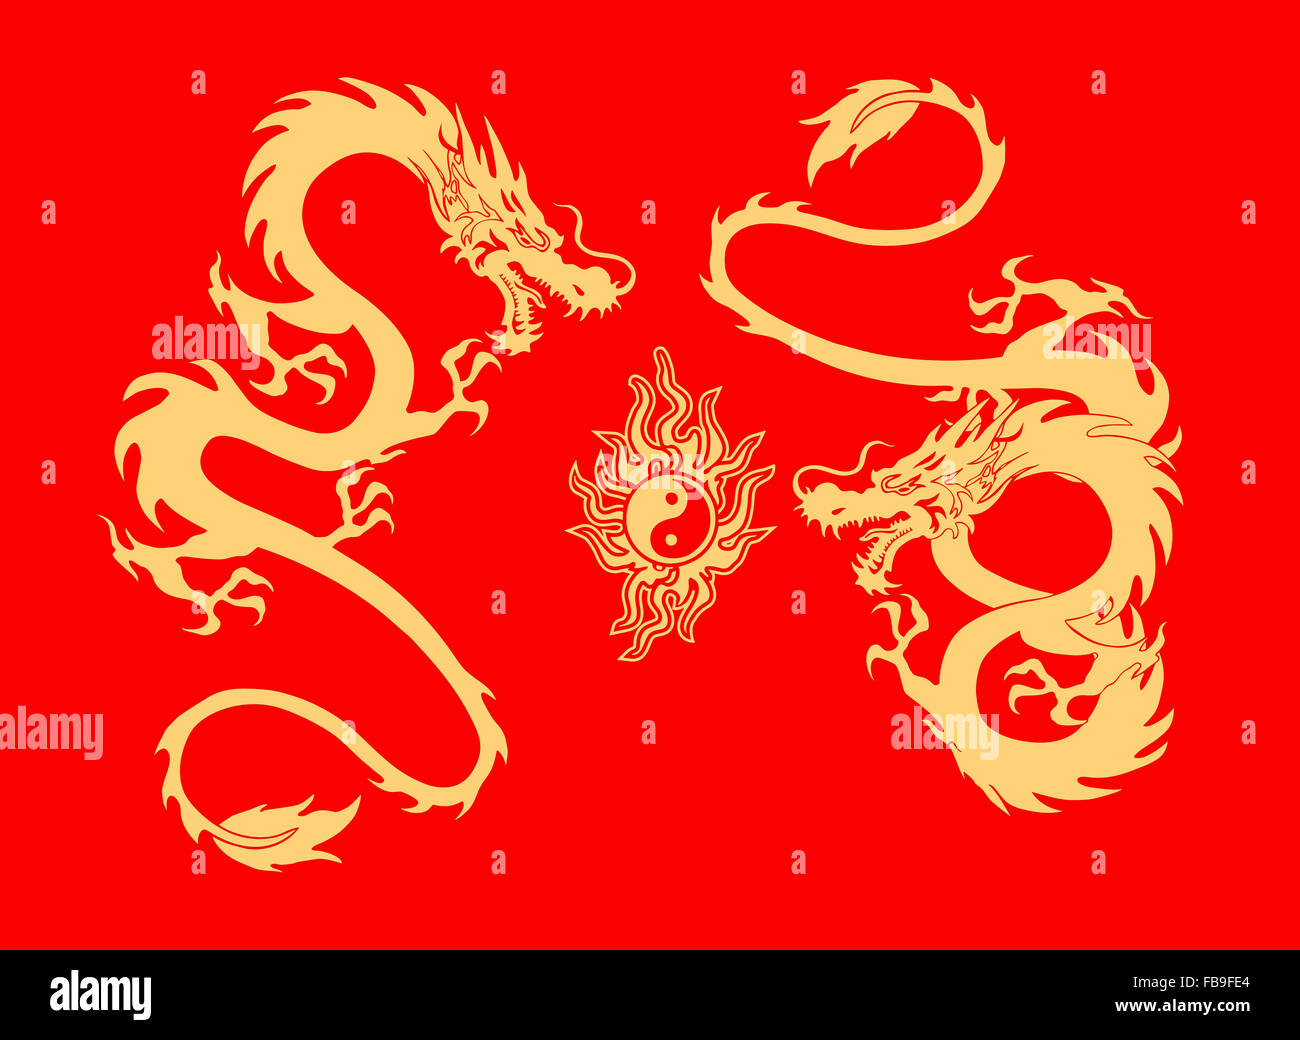 illustration of a two dragon and yinyang symbol tattoo isolated on red background Stock Photo